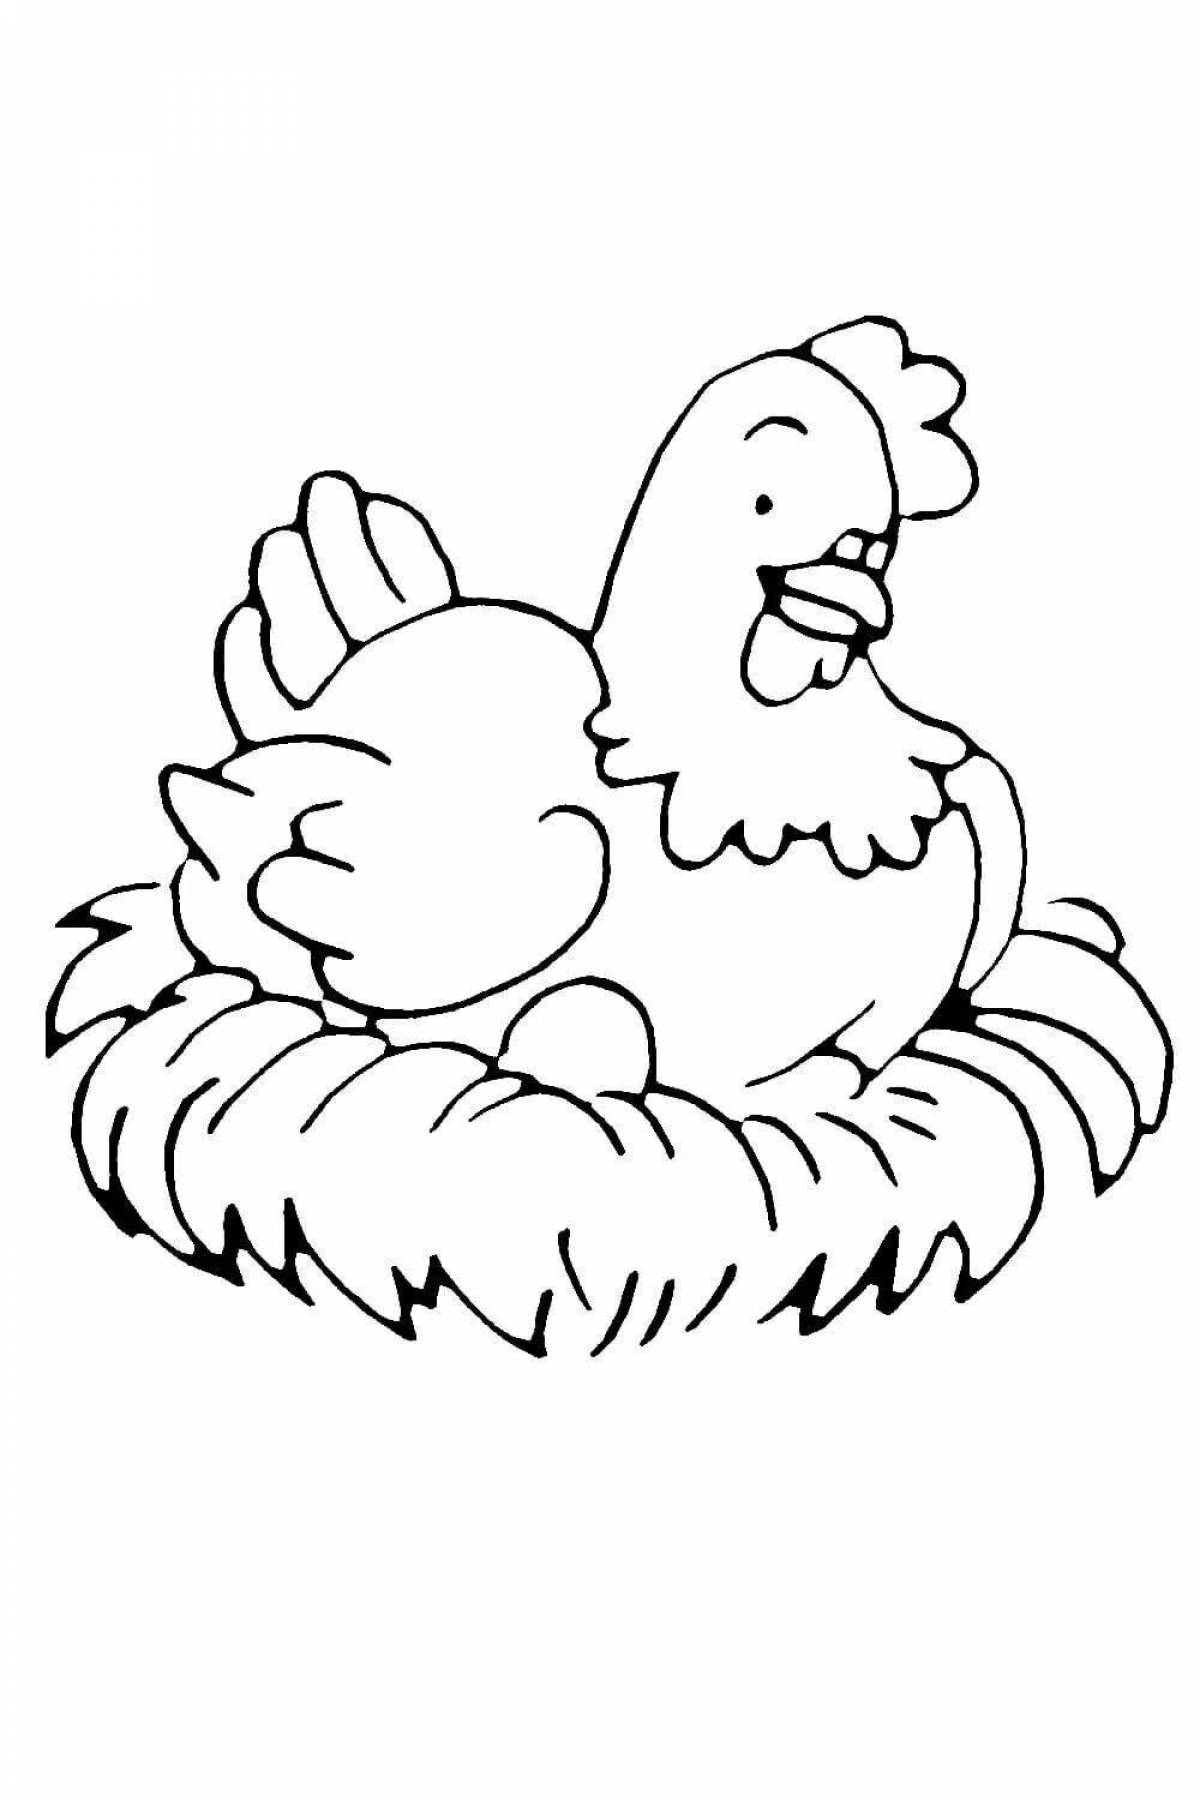 Chicken pockmarked playful coloring book for kids